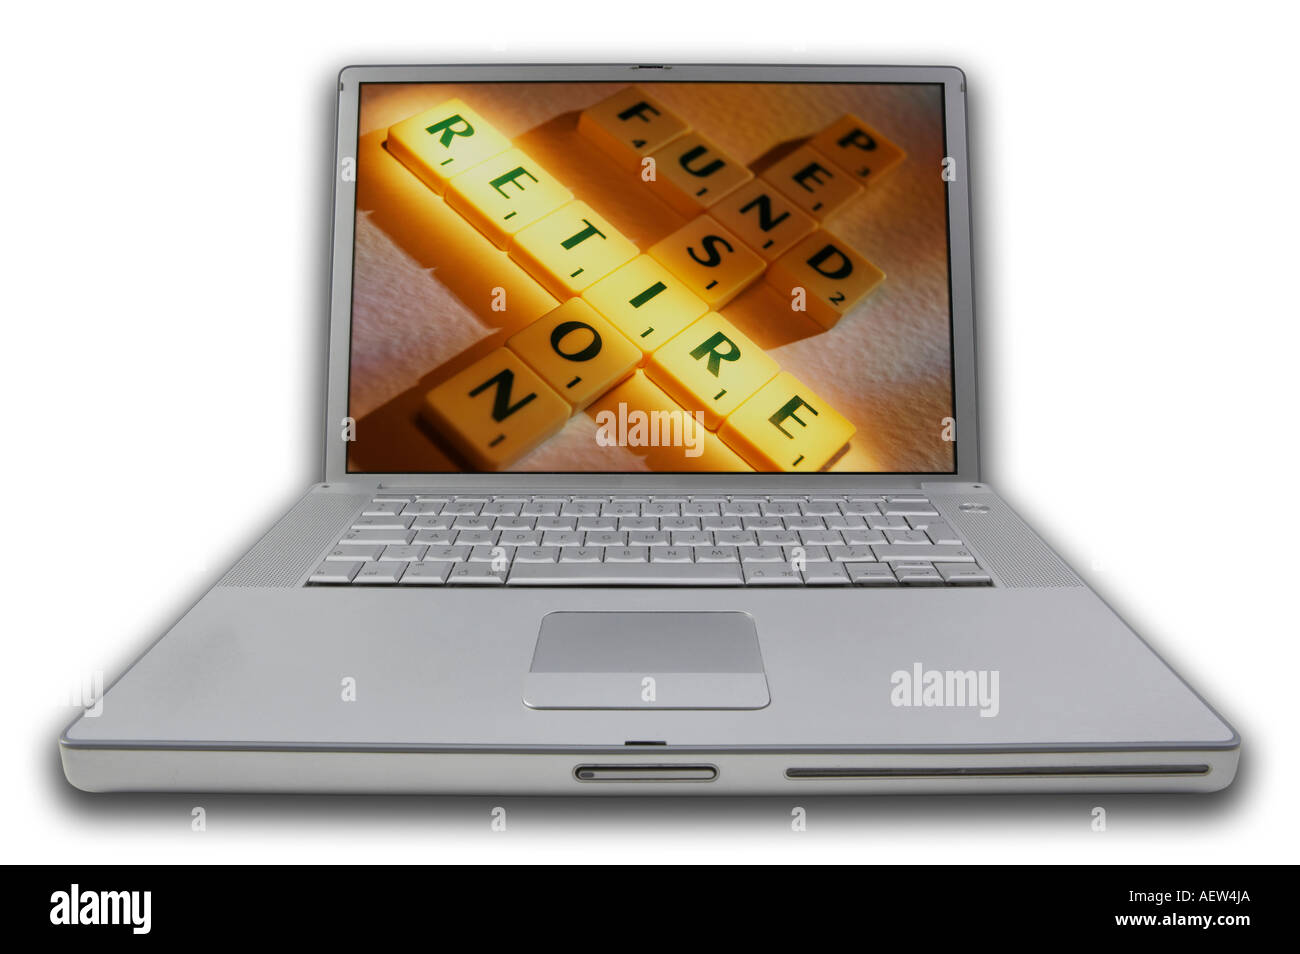 LAP TOP COMPUTER WITH SCRABBLE LETTERS ON SCREEN SPELLING WORDS PENSION FUND RETIRE Stock Photo